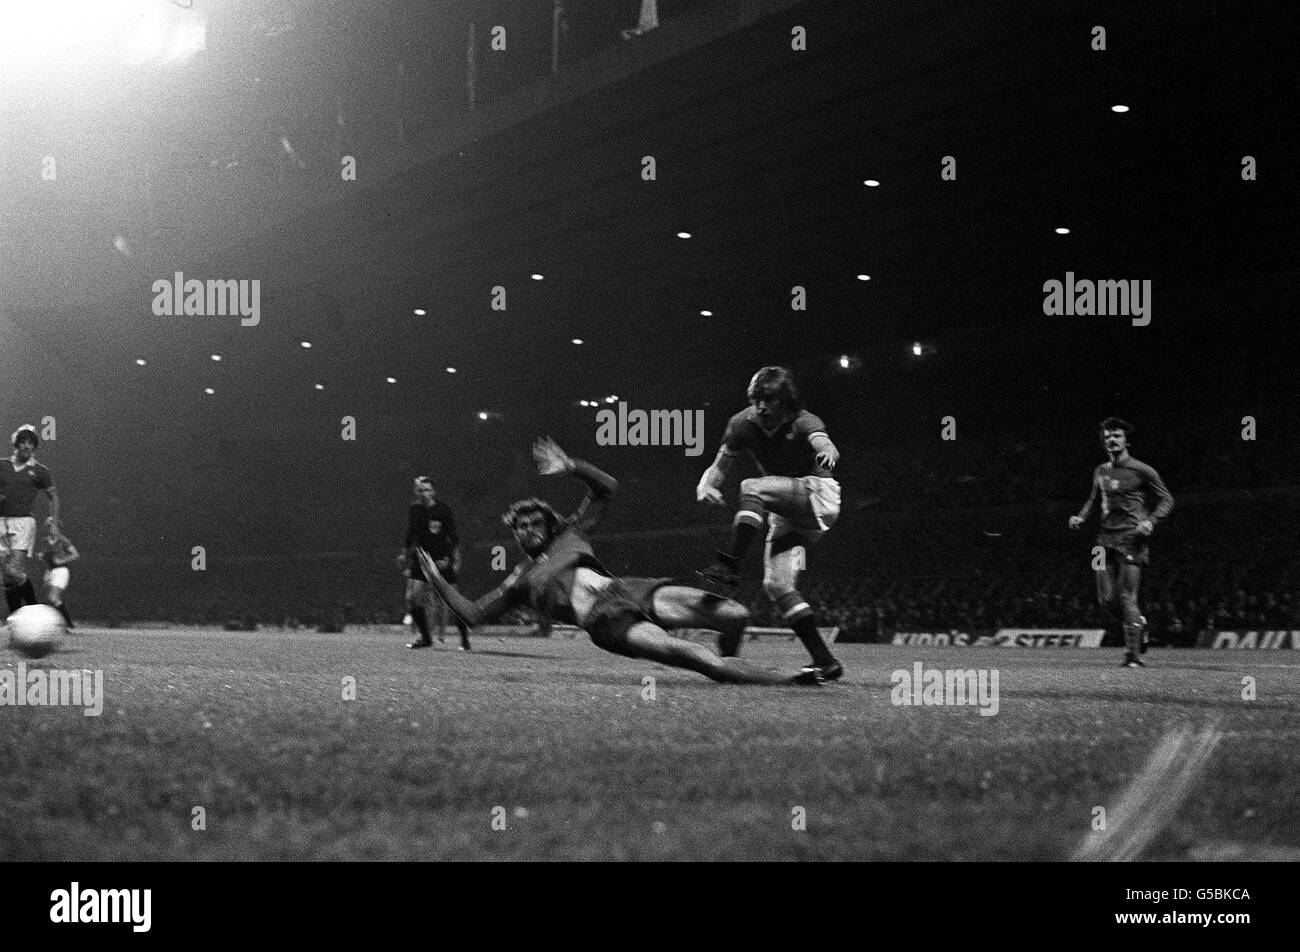 Manchester United's Sammy McIlroy's attempt at goal goes just wide as Ajax's Hulshof slides to tackle during the E.U.F.A Cup first round match at Old Trafford. Stock Photo